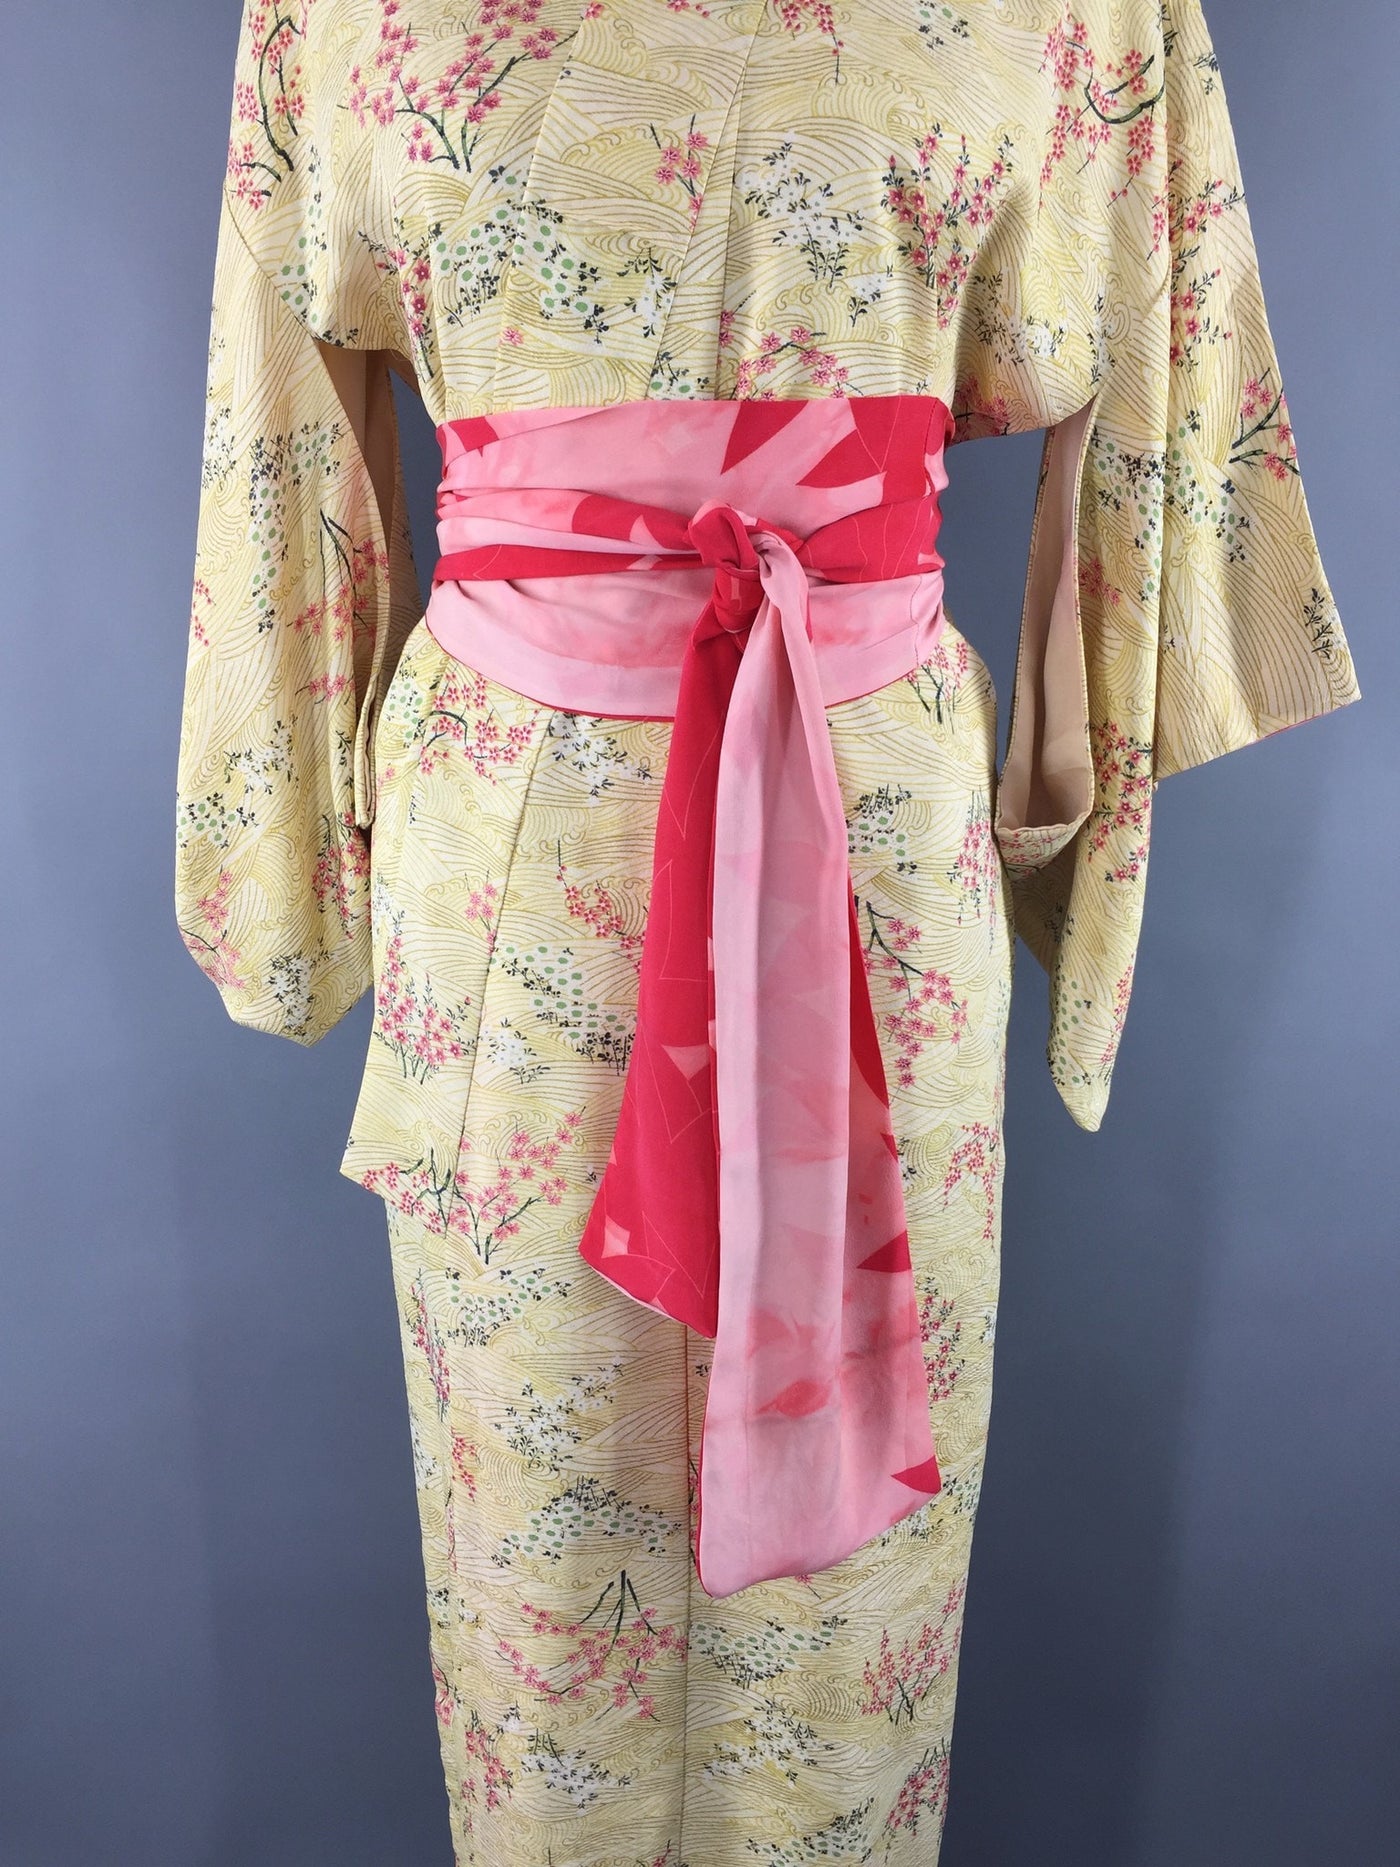 1950s Vintage Silk Kimono Robe with Yellow and Pink Floral Print - ThisBlueBird